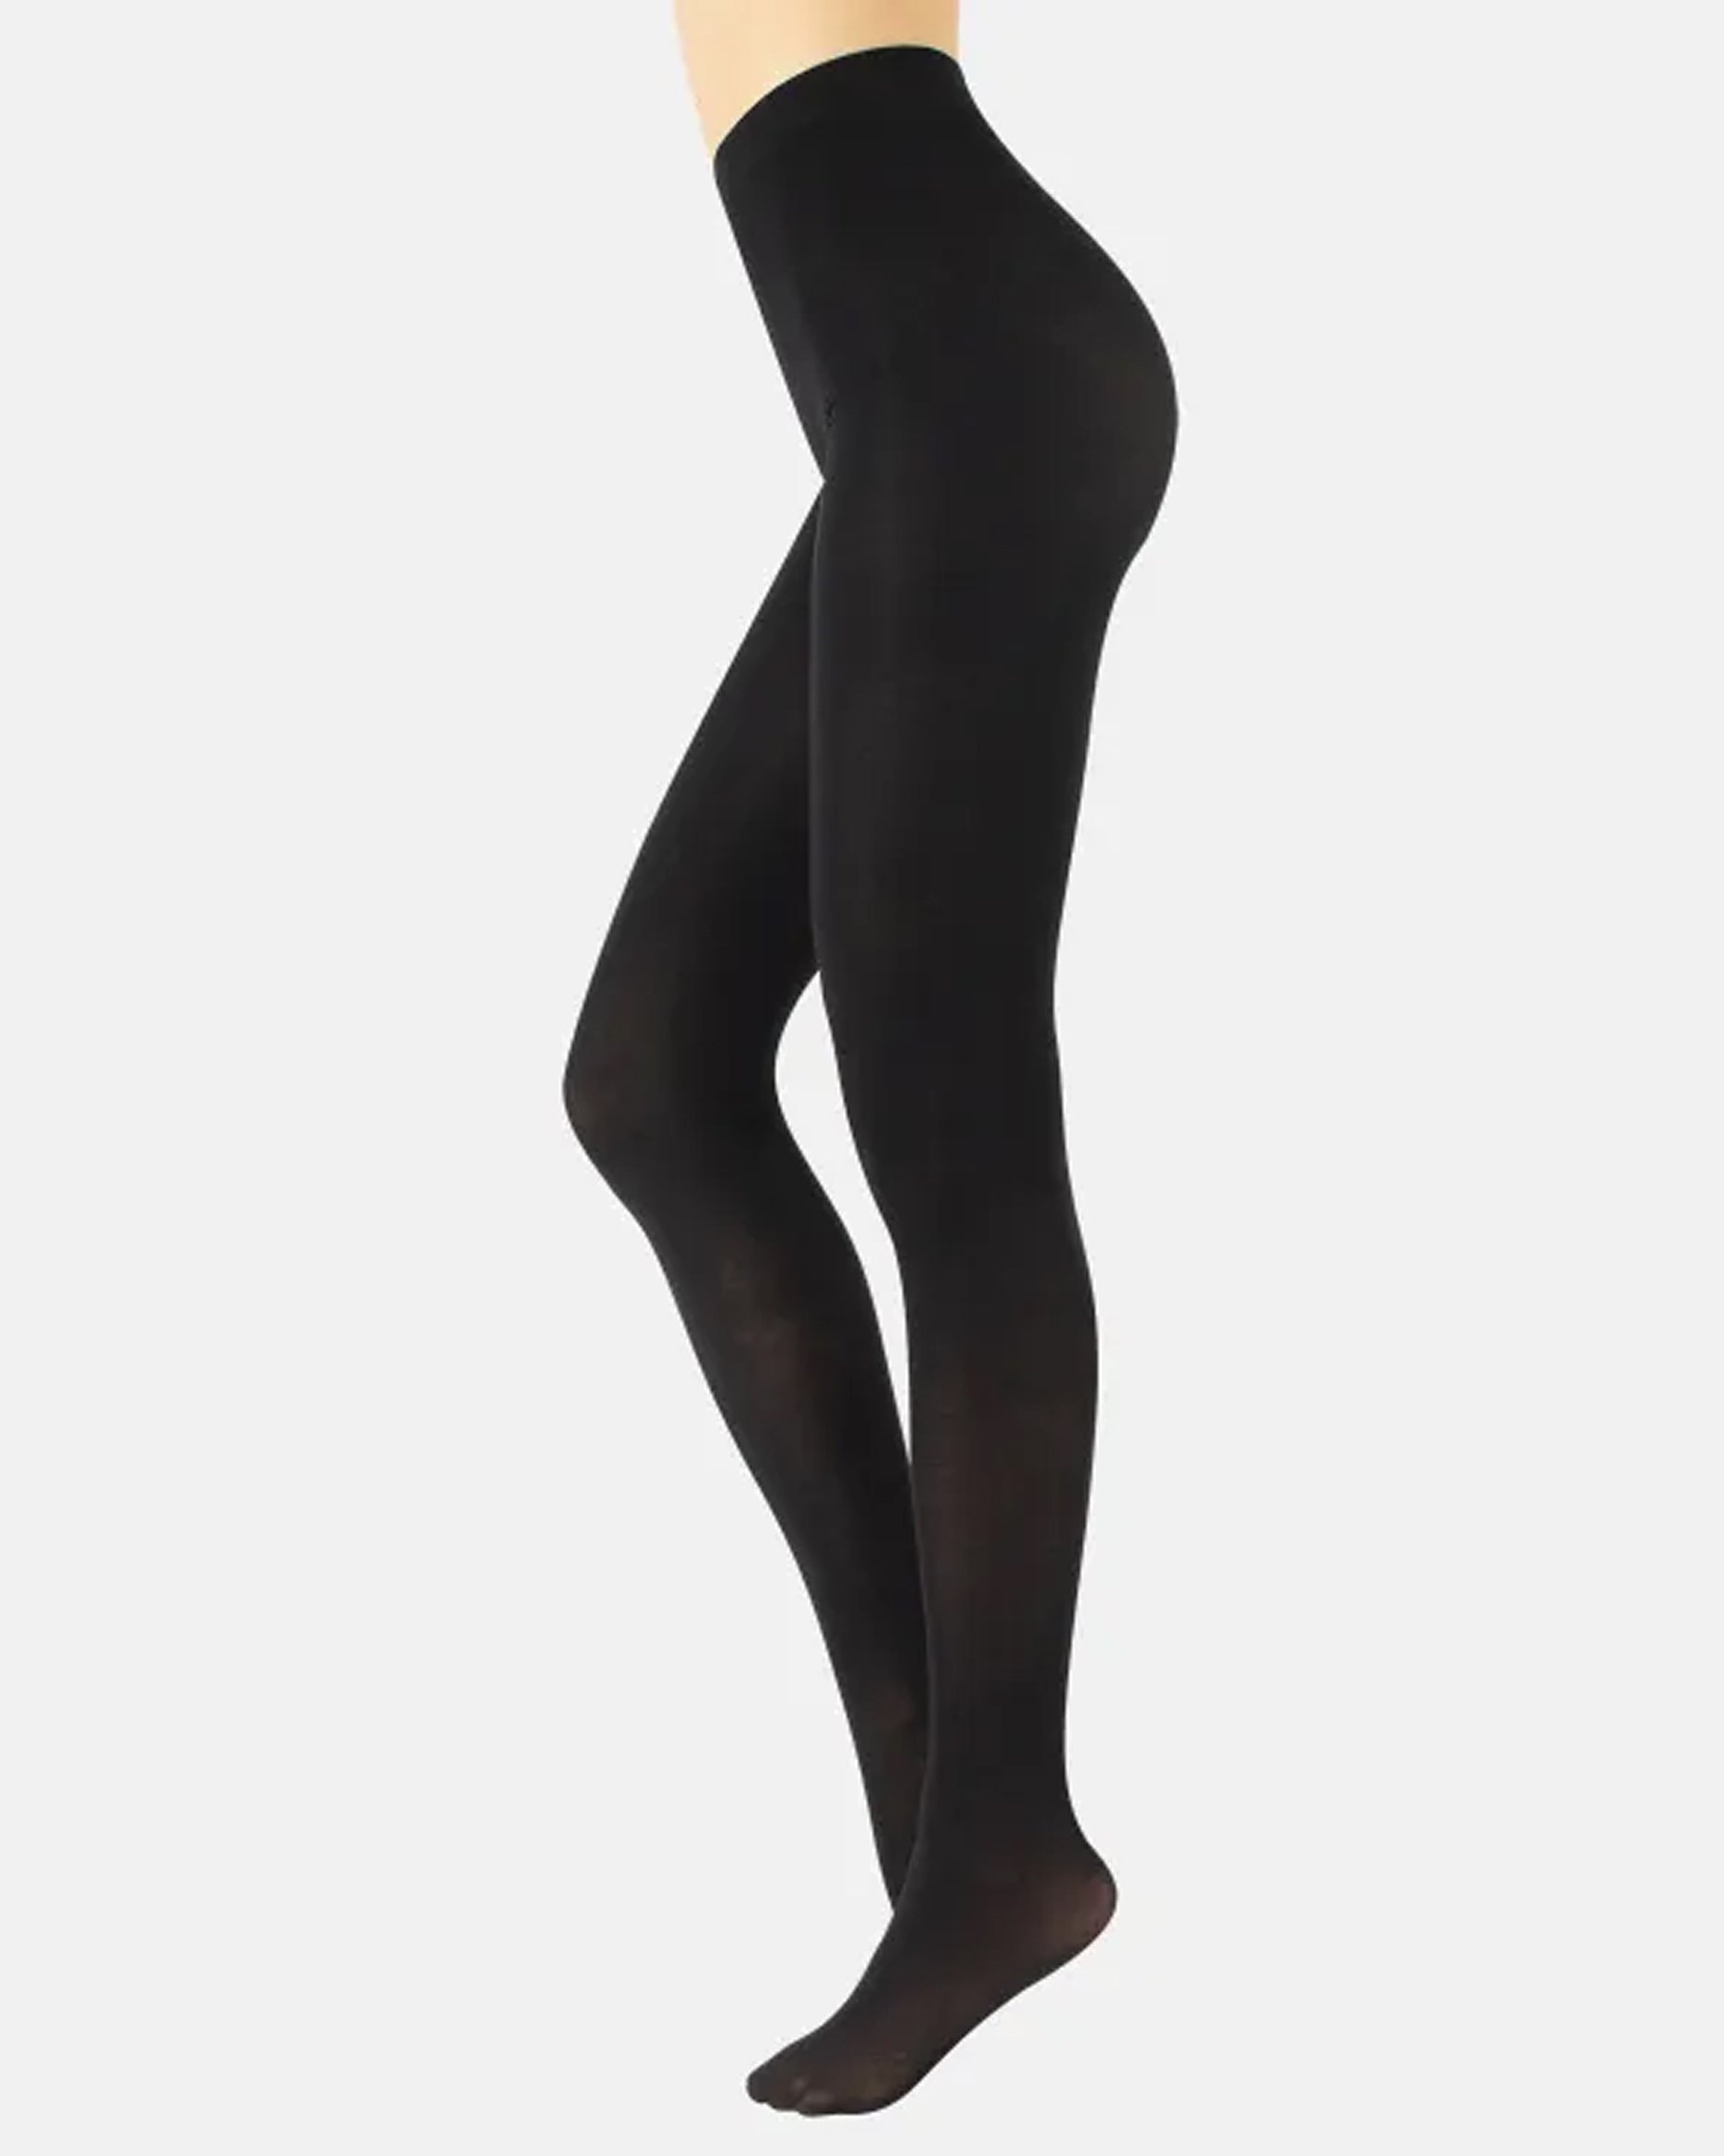 Calzitaly Cotton Tights - Warm and light black knitted cotton mix tights with gusset, flat seams and comfort waist band.